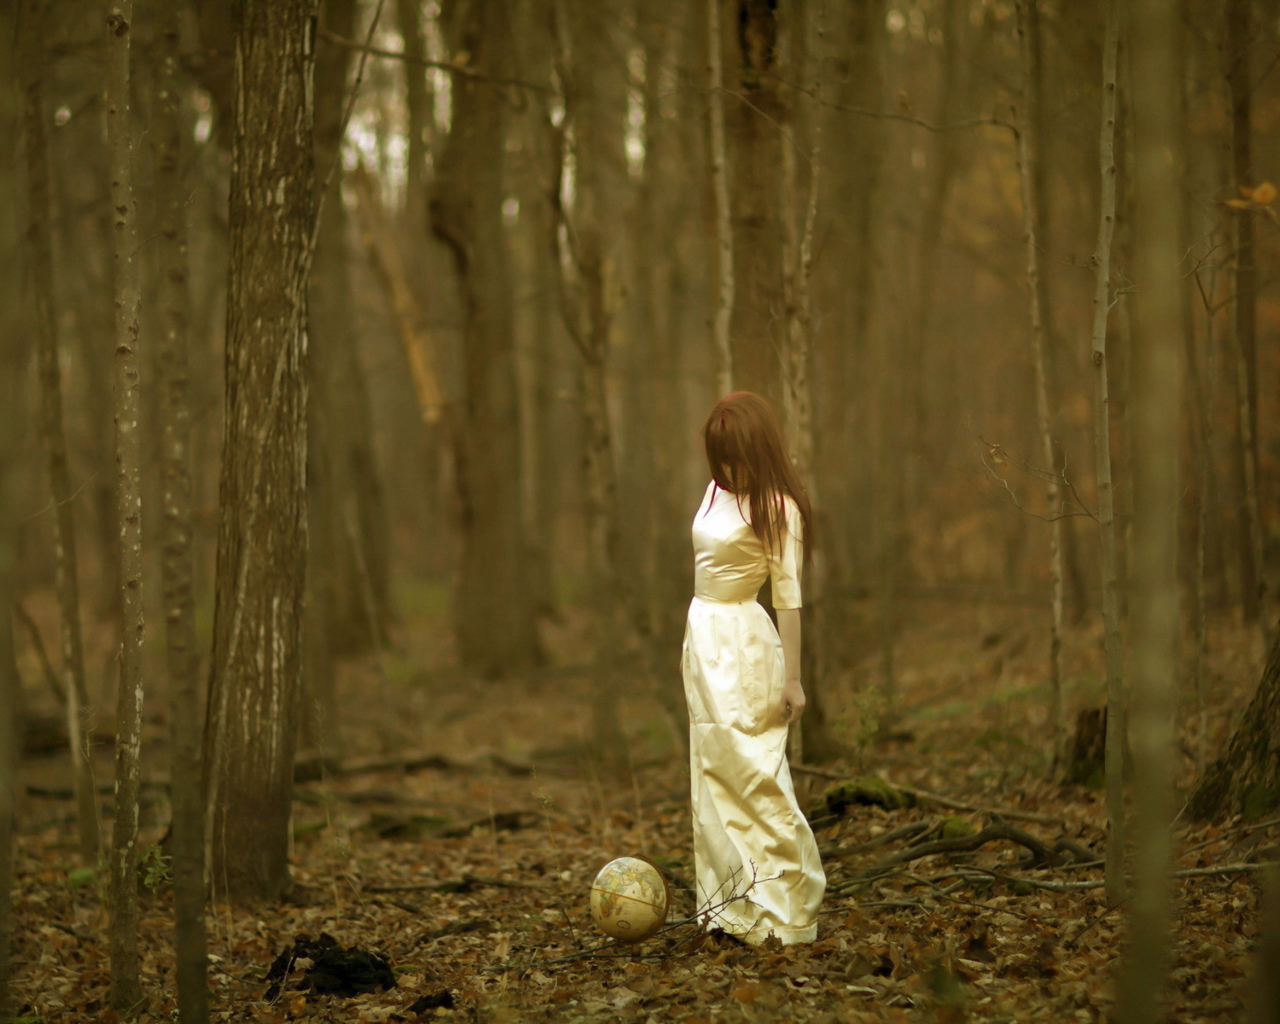 Das Girl And Globe In Forest Wallpaper 1280x1024